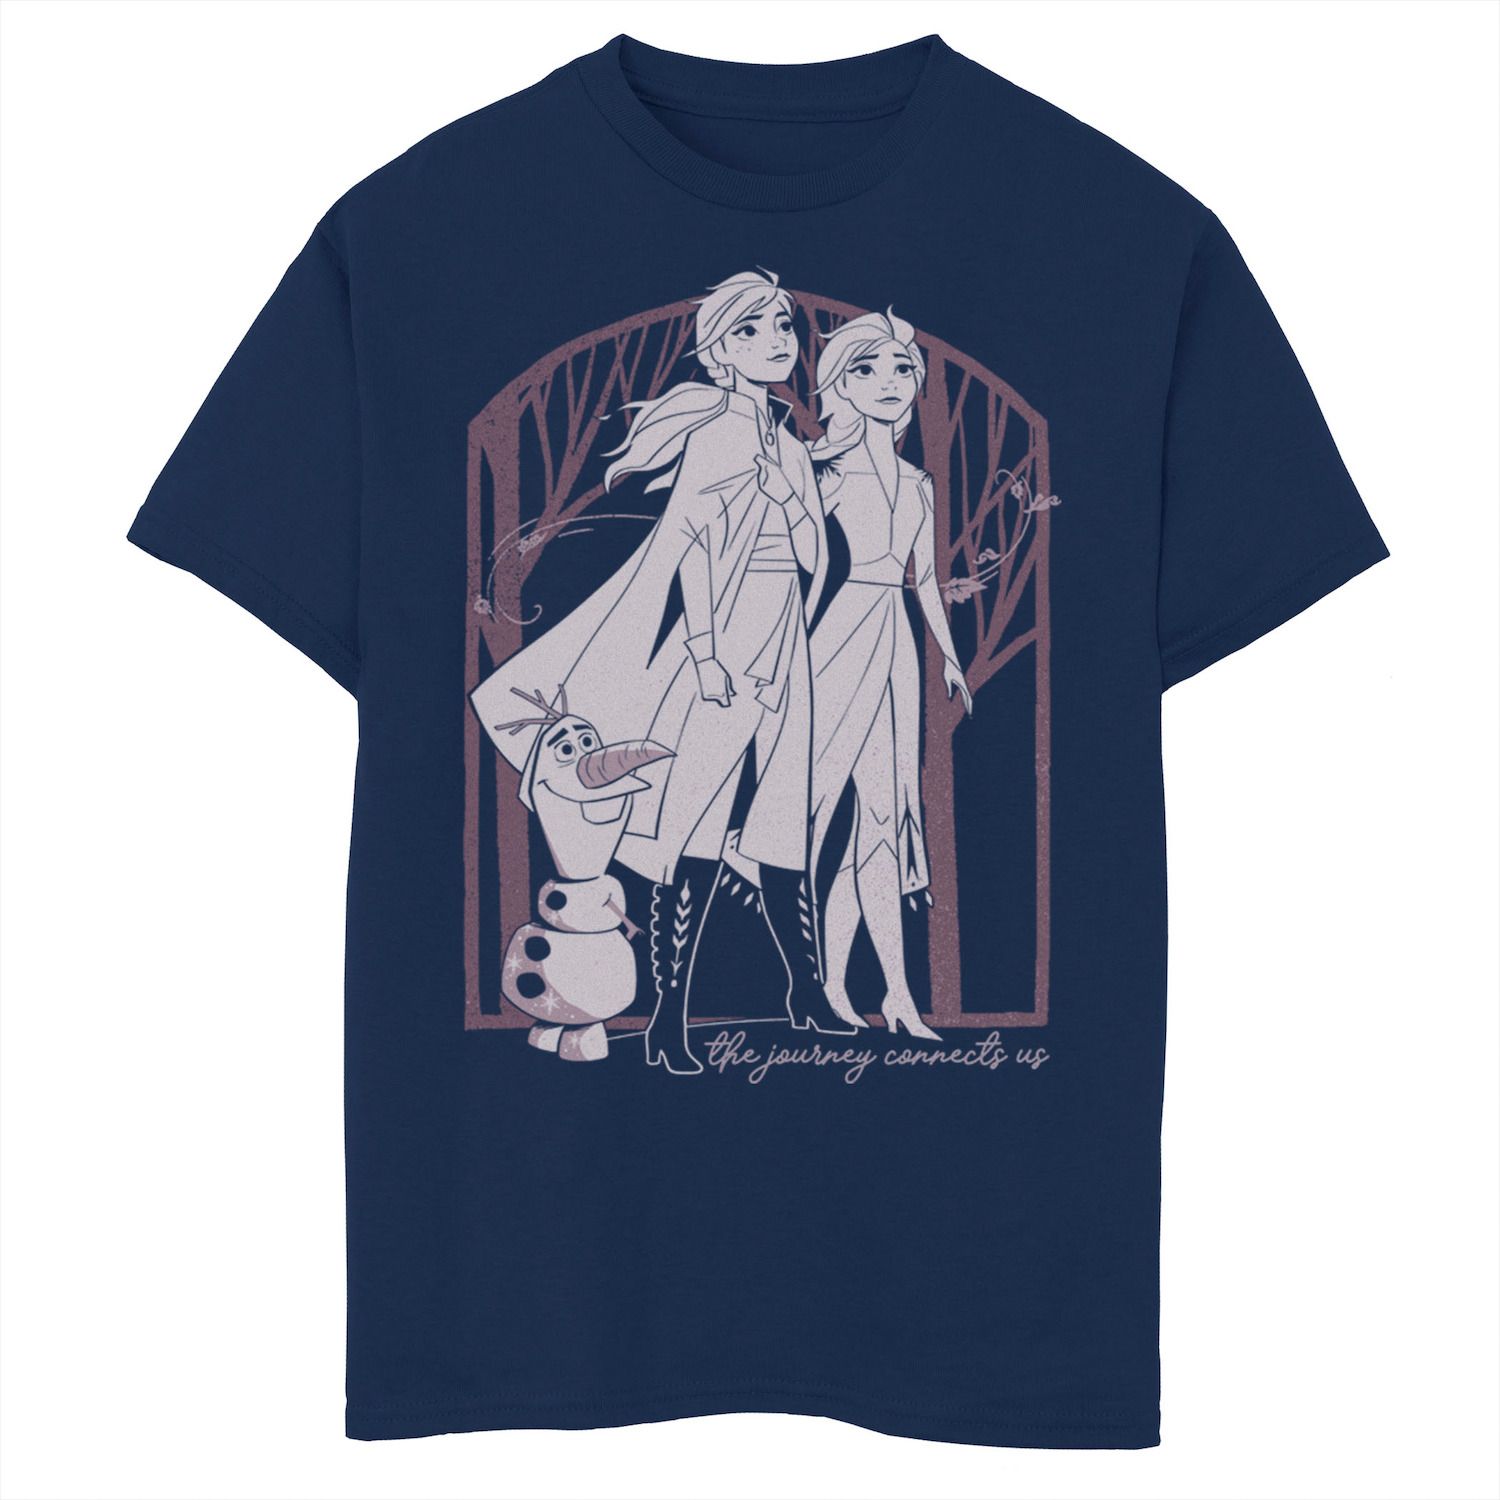 Image for Disney 's Frozen 2 Boys 8-20 Elsa Anna Olaf The Journey Connects Us Graphic Tee at Kohl's.